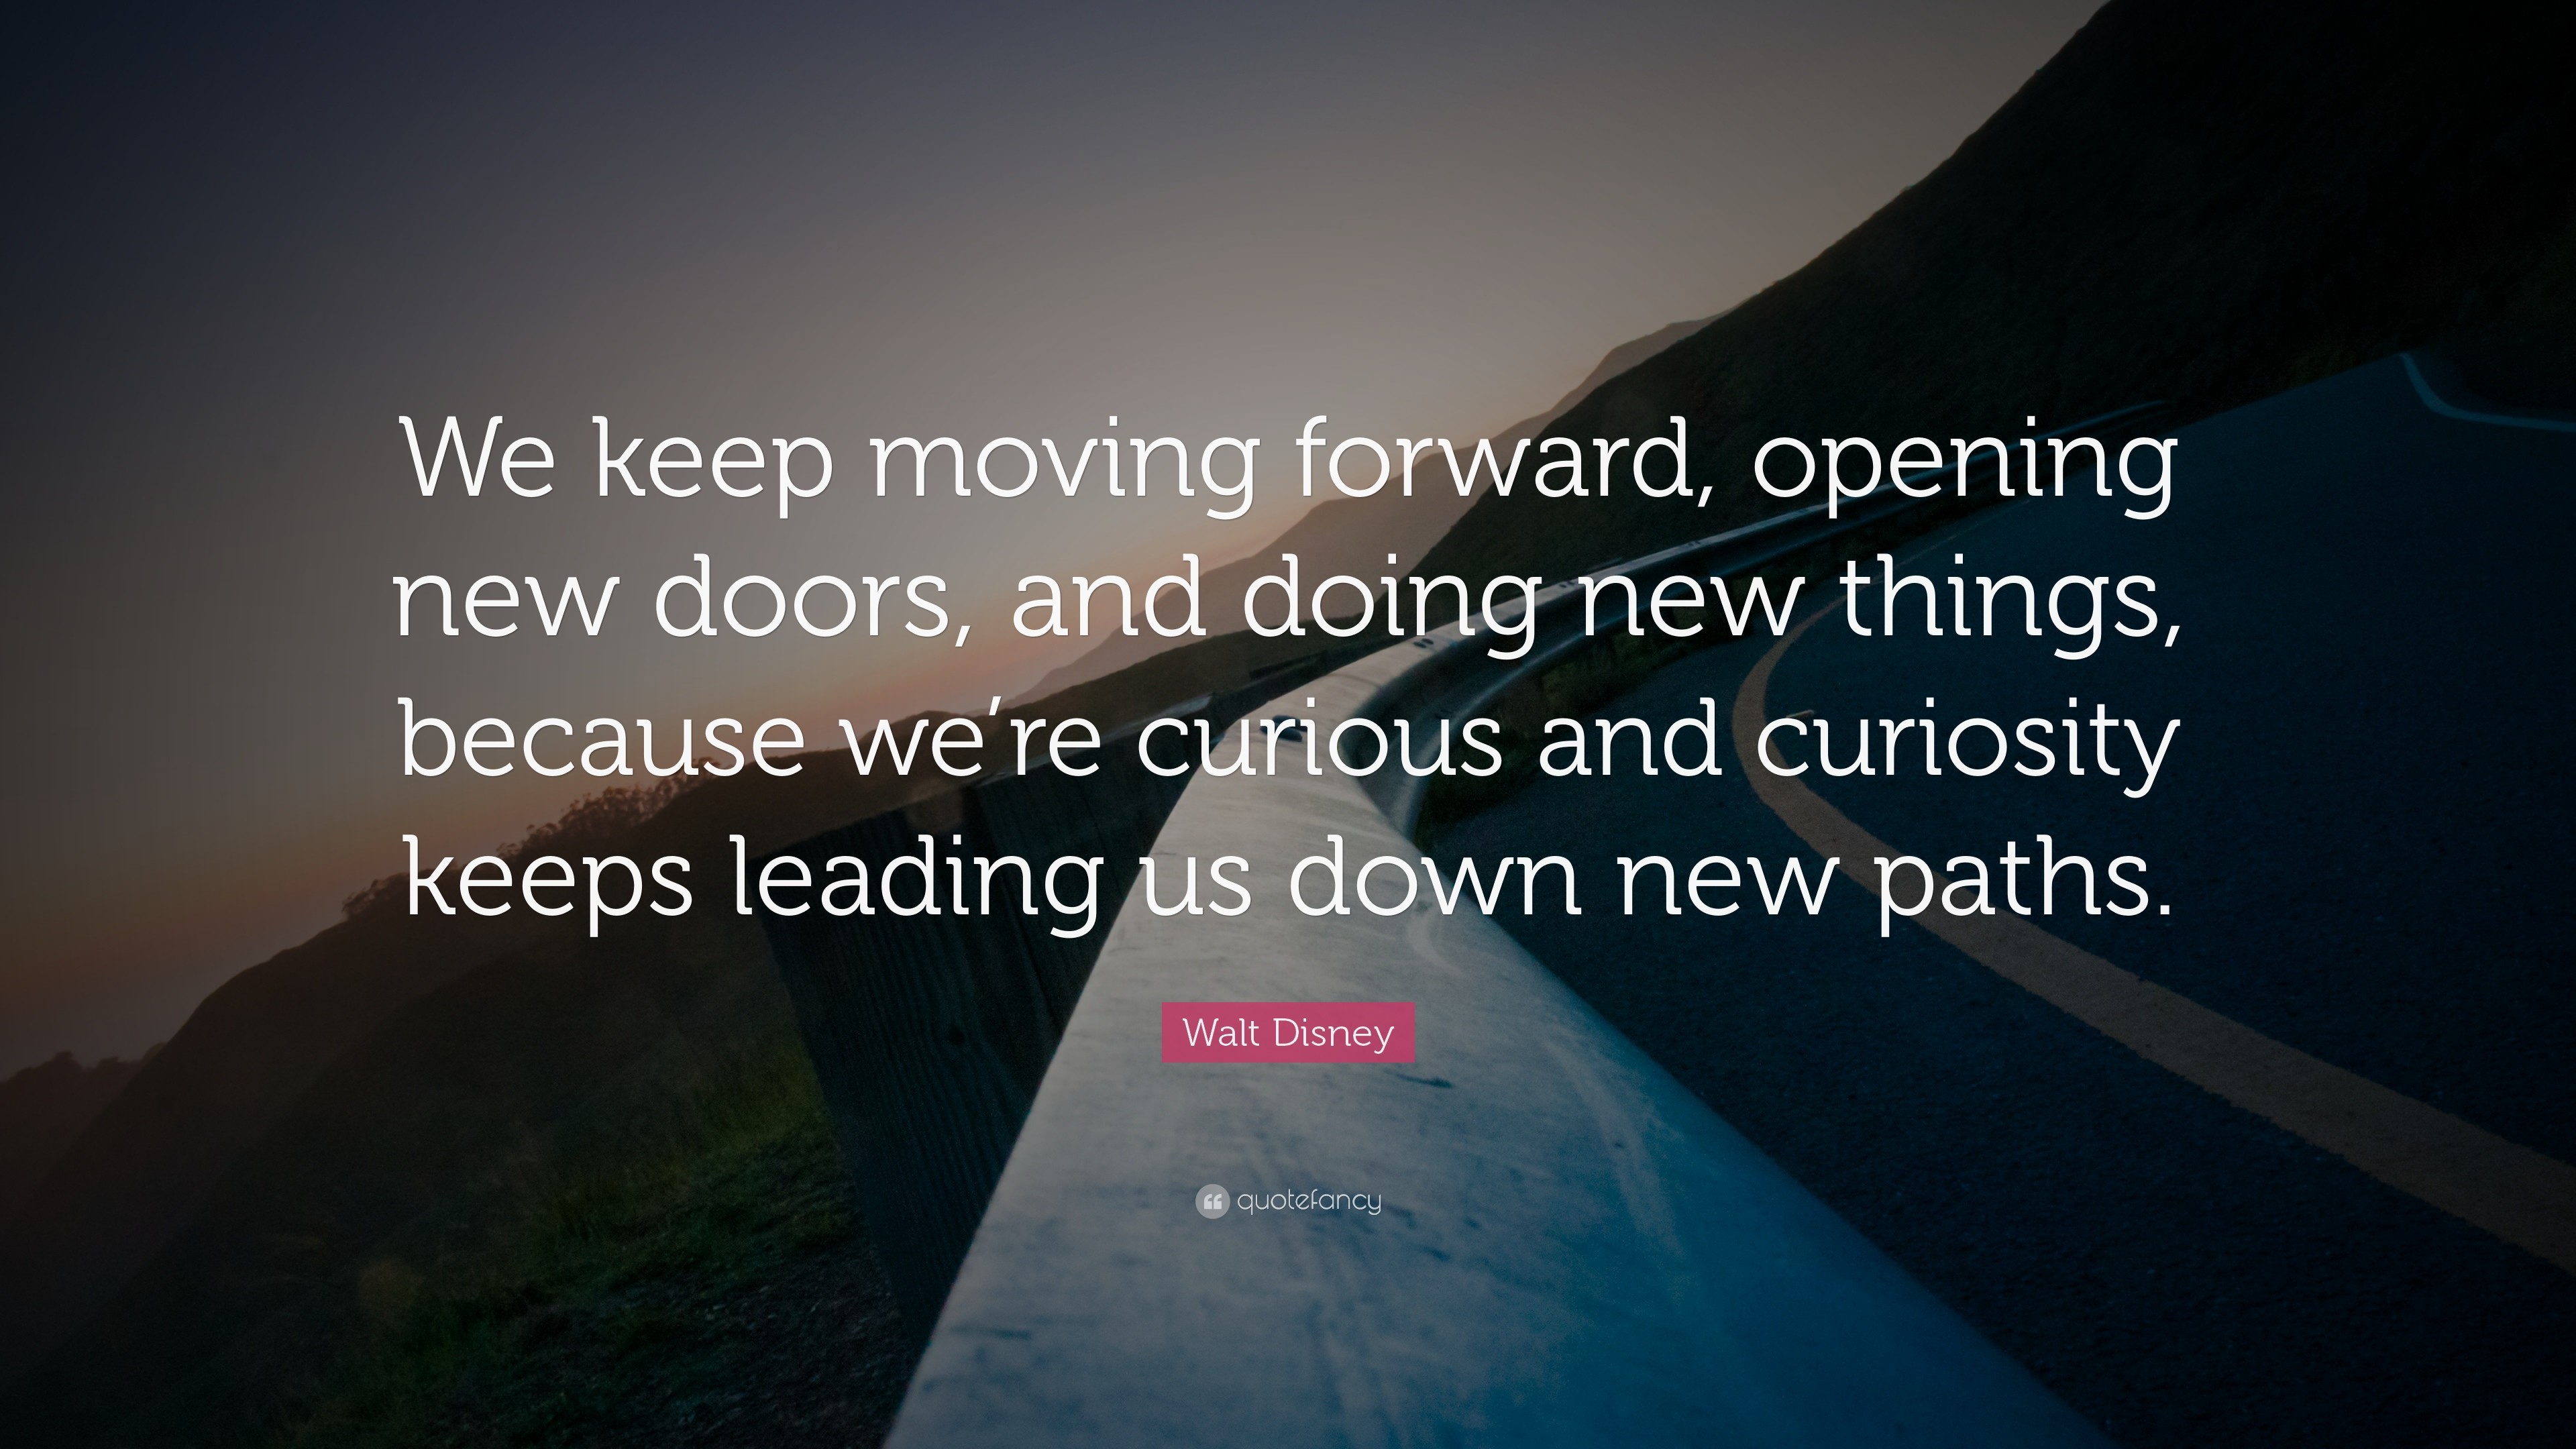 Walt Disney Quote We keep moving forward, opening new doors, and doing